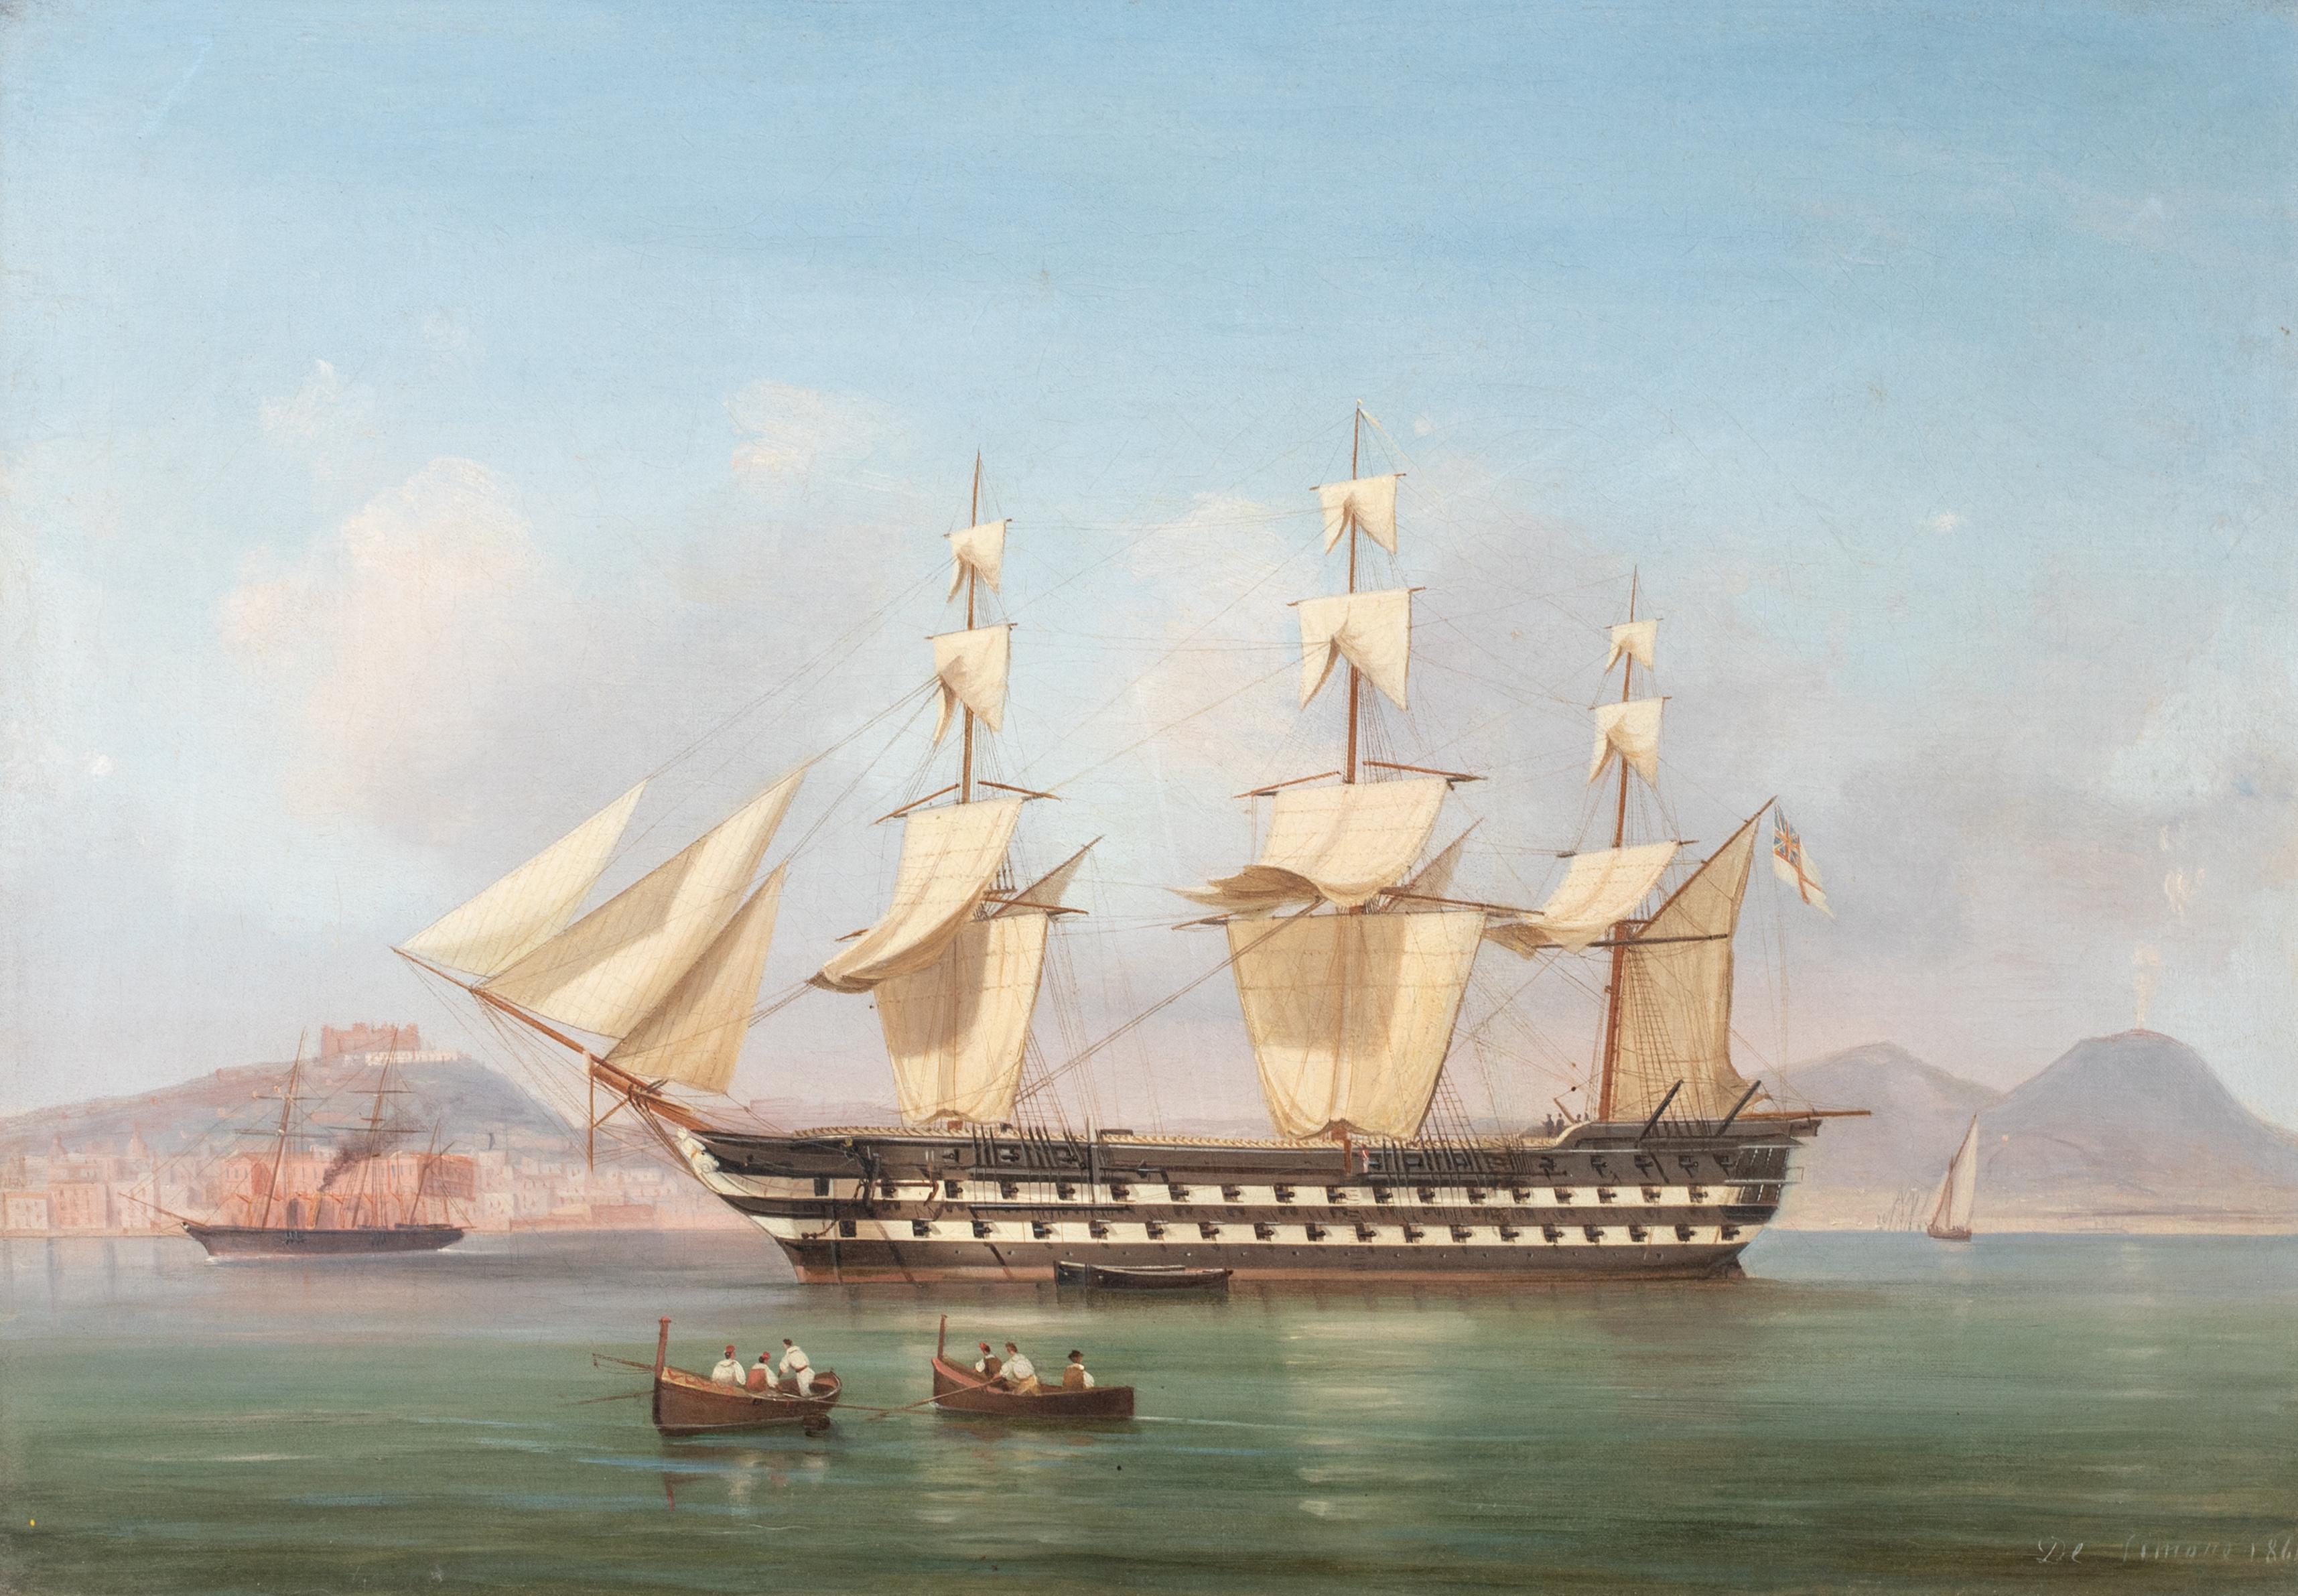 British Royal Navy Anchored Off Naples, 19th Century

TOMMASO DE SIMONE (1805-1888)

Large 19th Century view of the British Royal Navy fleet off the coast of Naples, oil on canvas by Tommaso De Simone. Excellent quality and condition example of the